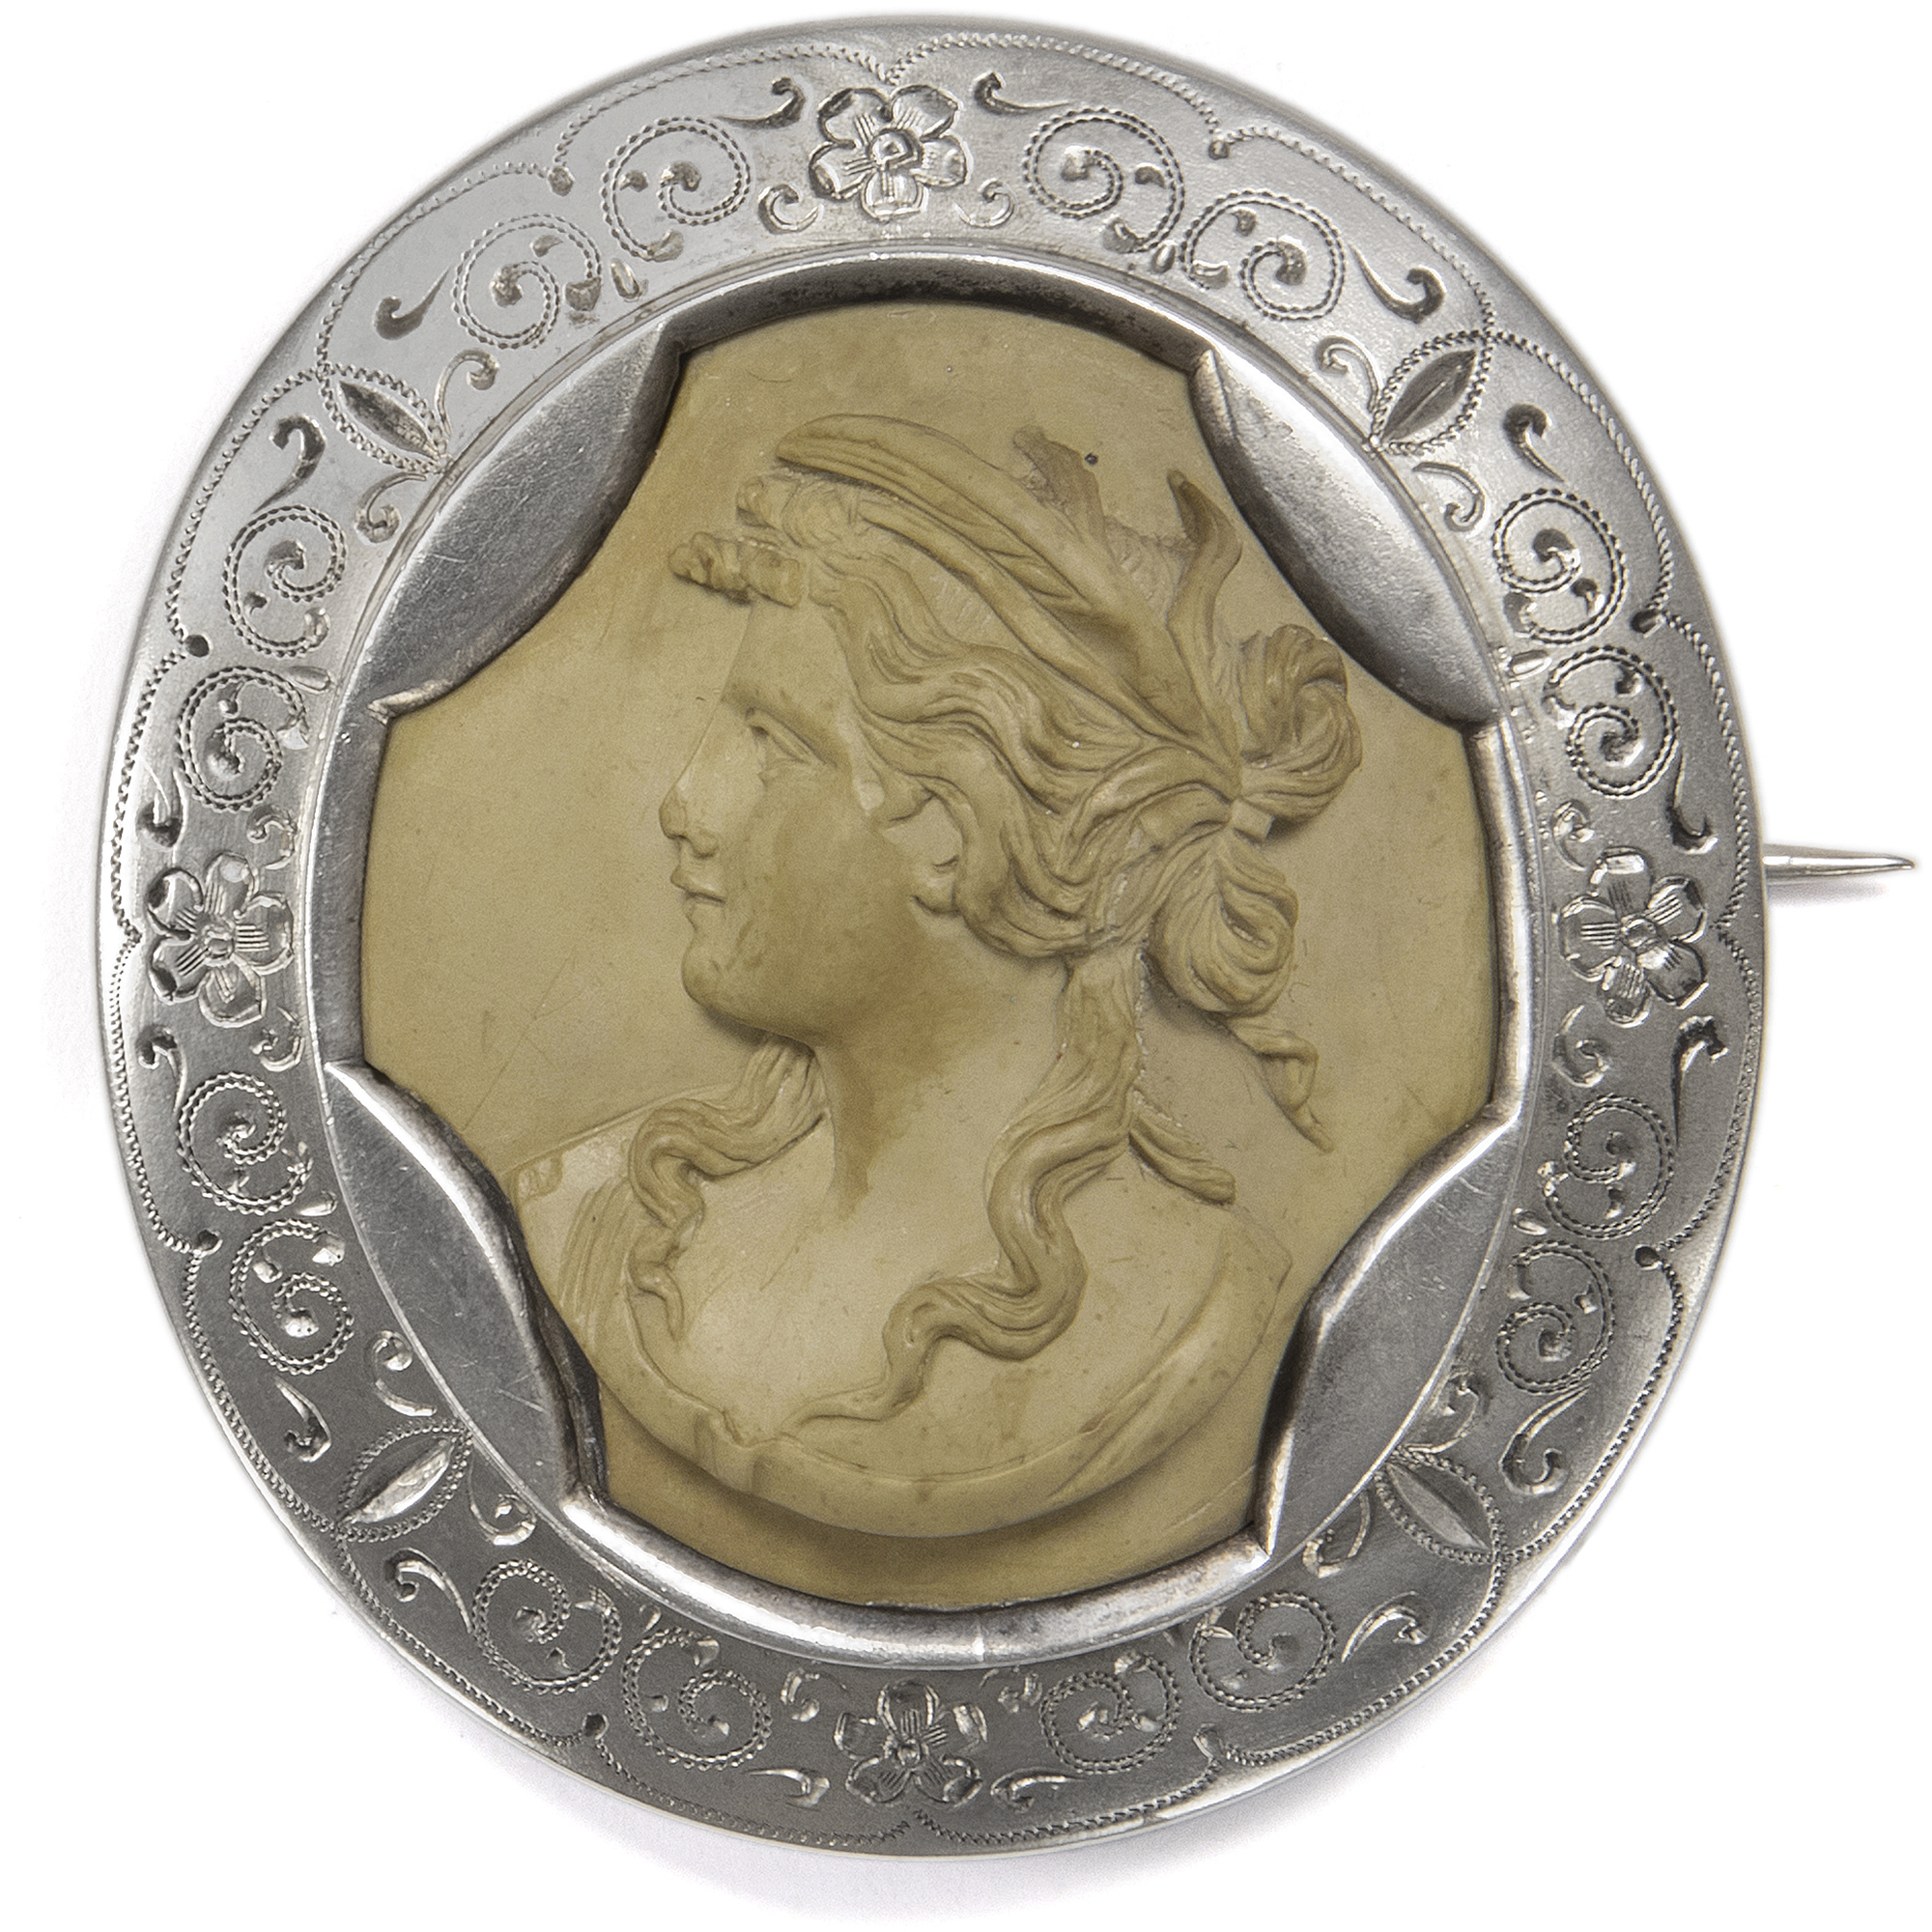 Antique Medallion Brooch With Lava Cameo of Hera in Silver Setting, Around 1880